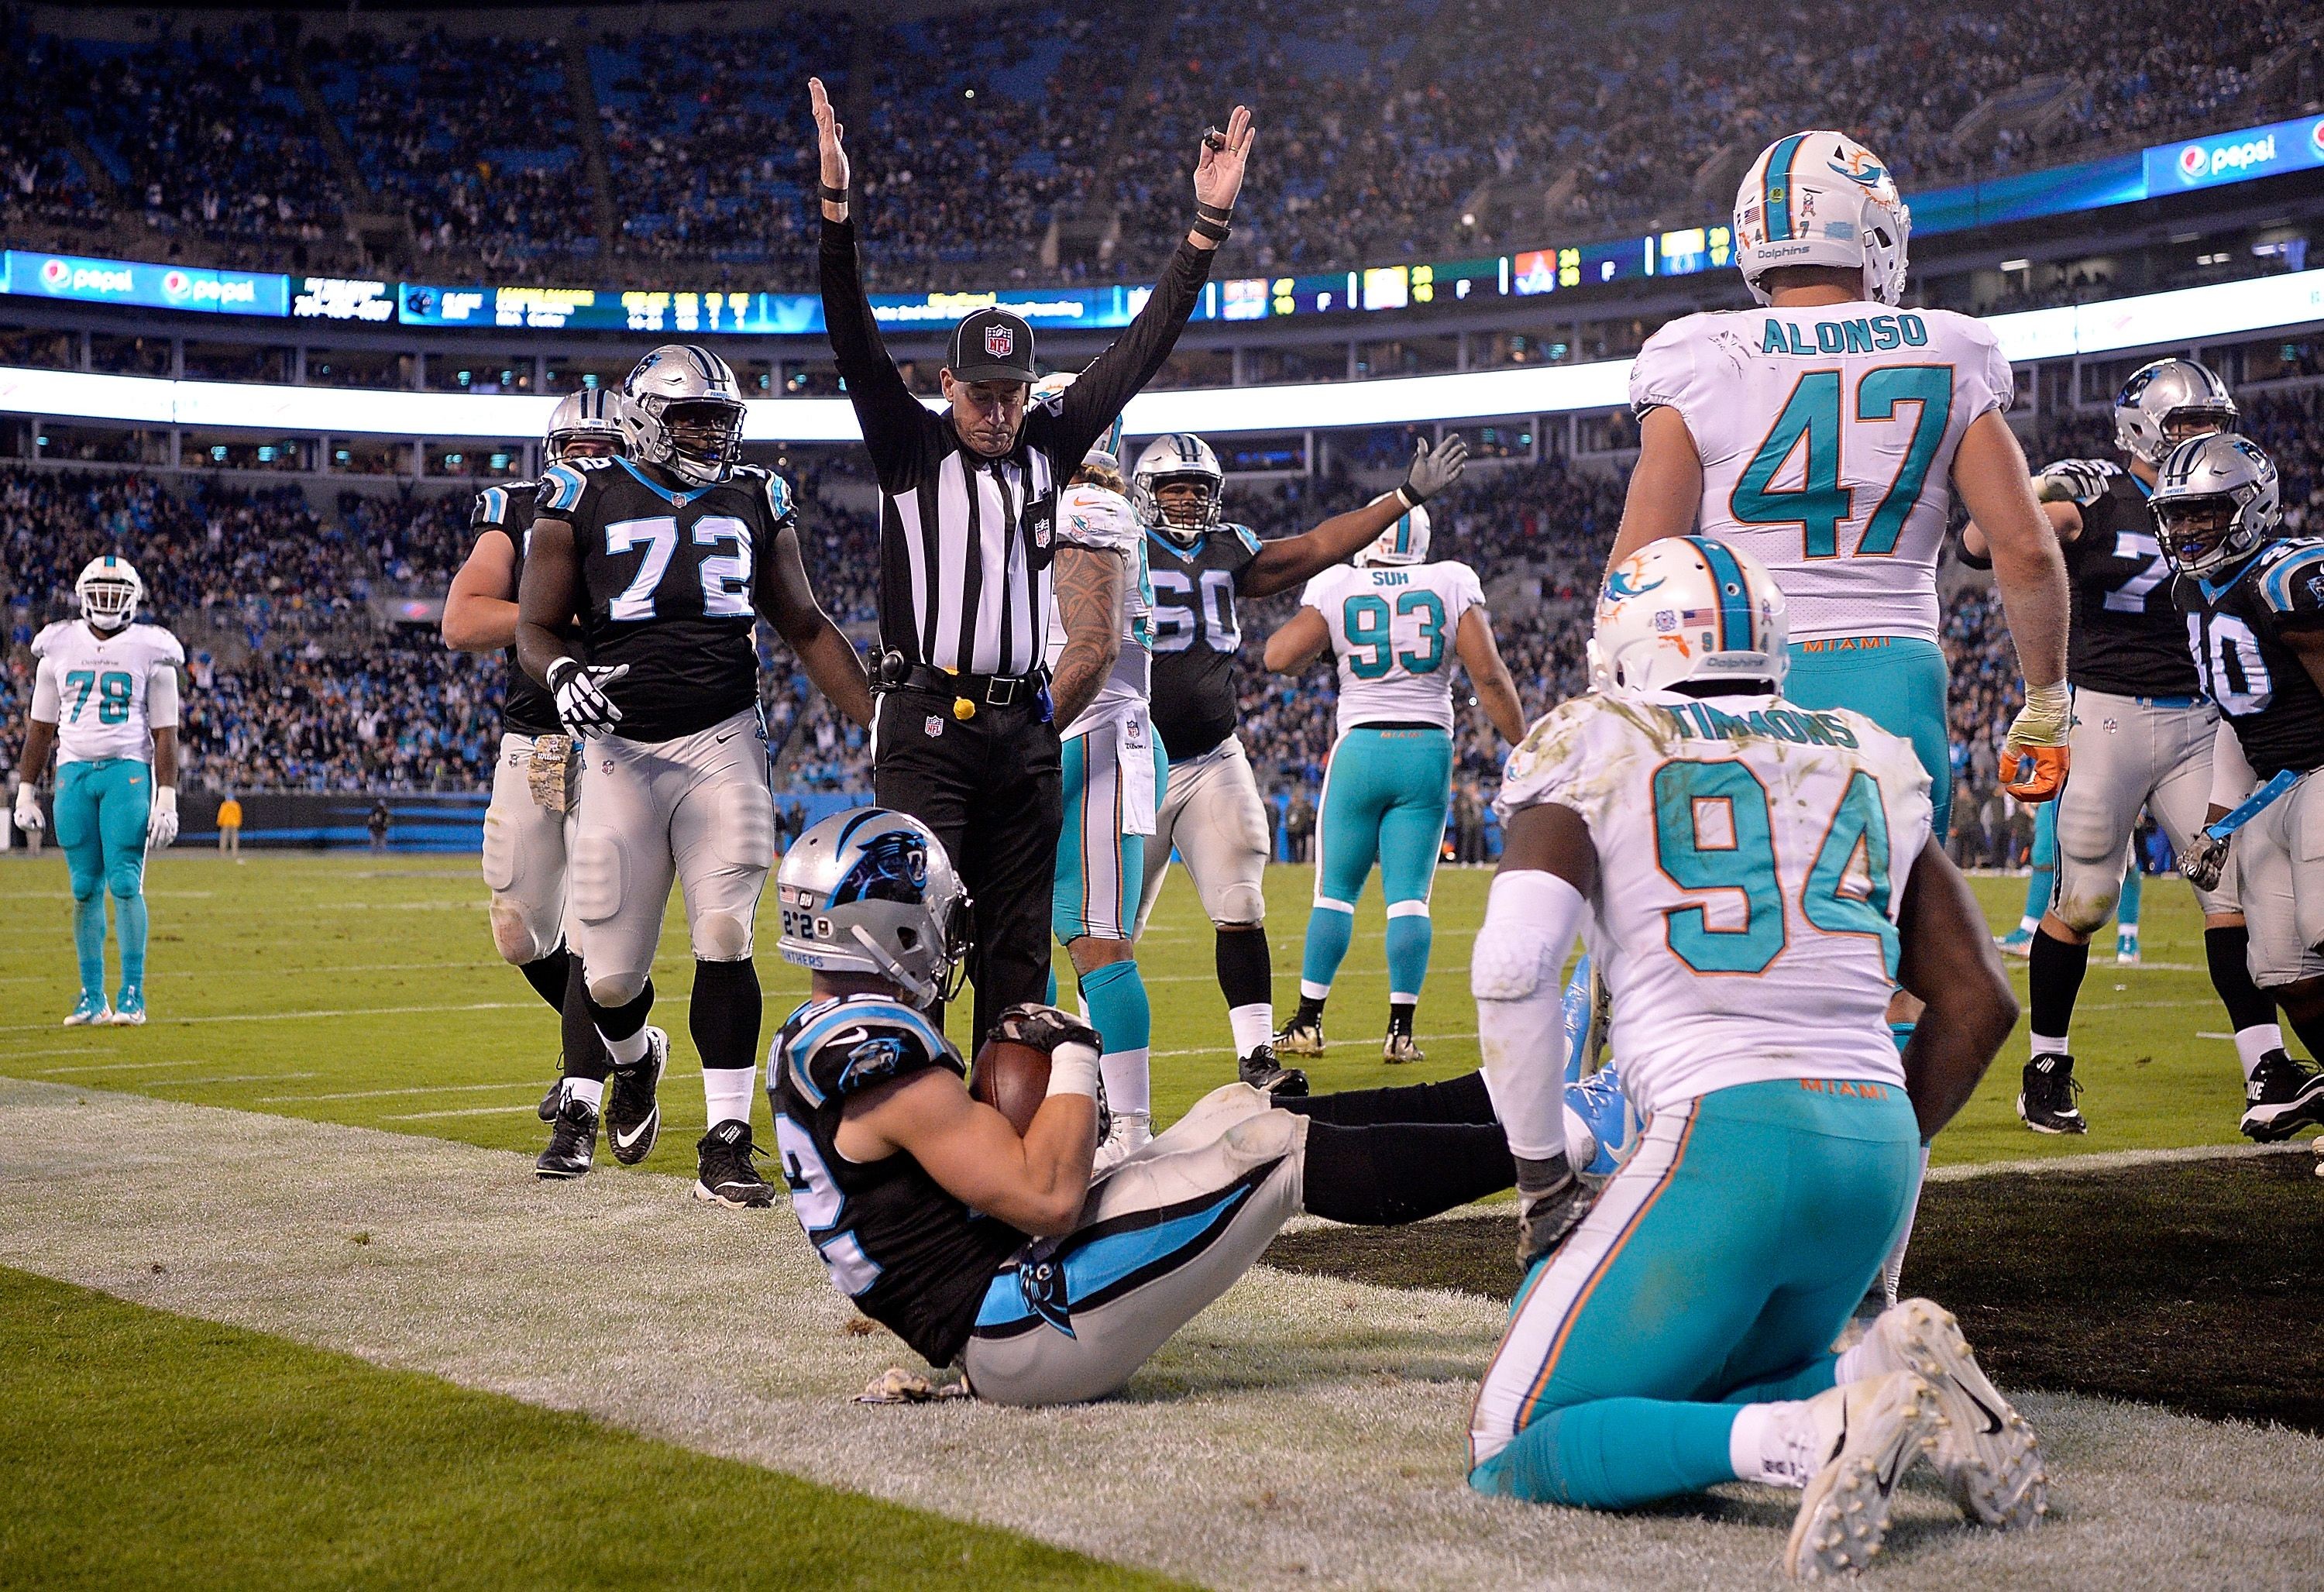 Carolina Panthers Offense struggling to score points in fourth quarter